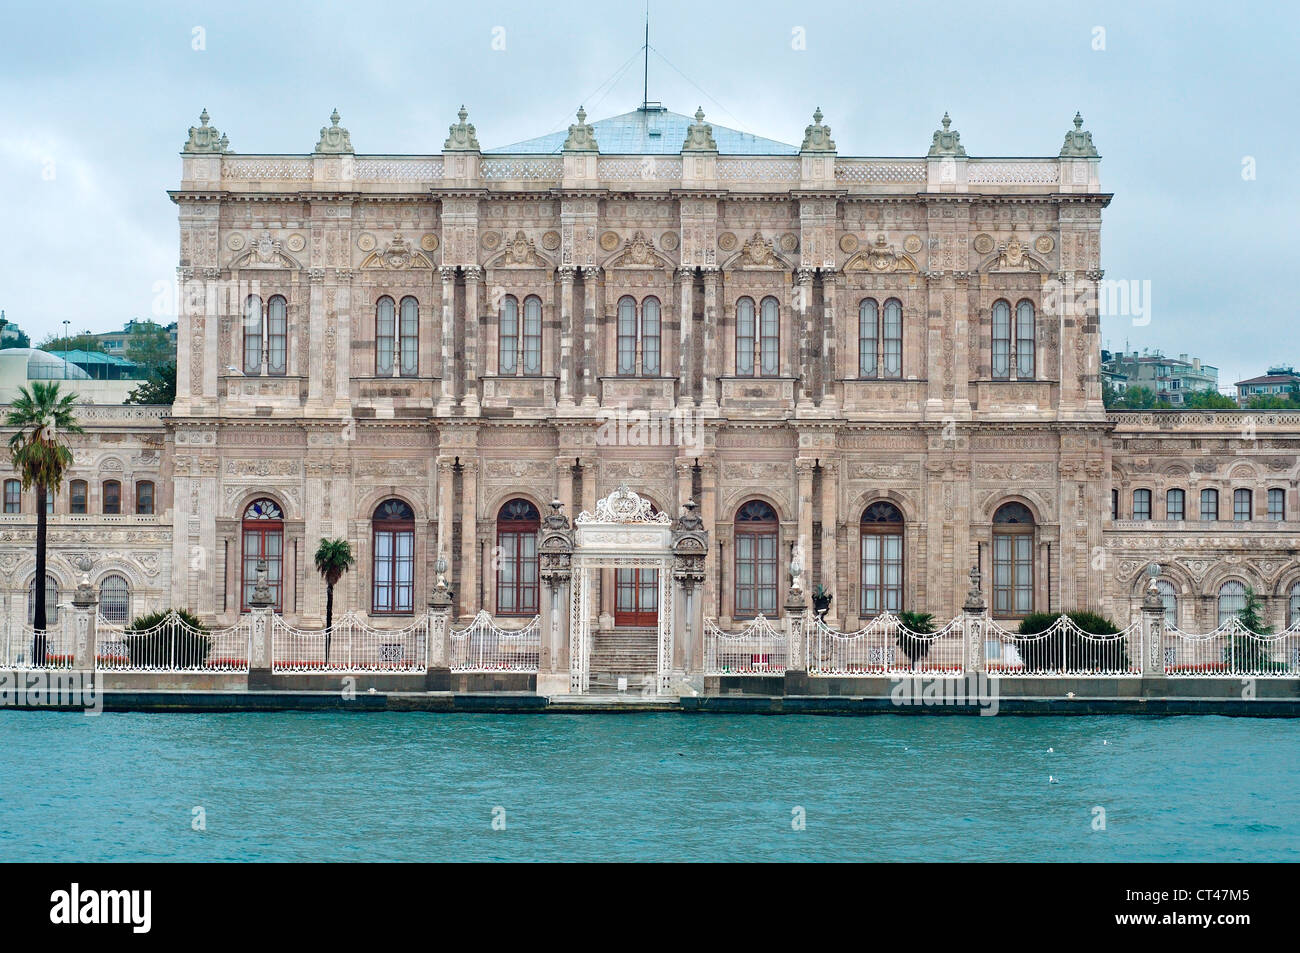 Turkey, Istanbul, Dolmabahce Palace, the Sultan's palace from the 19th Century Stock Photo